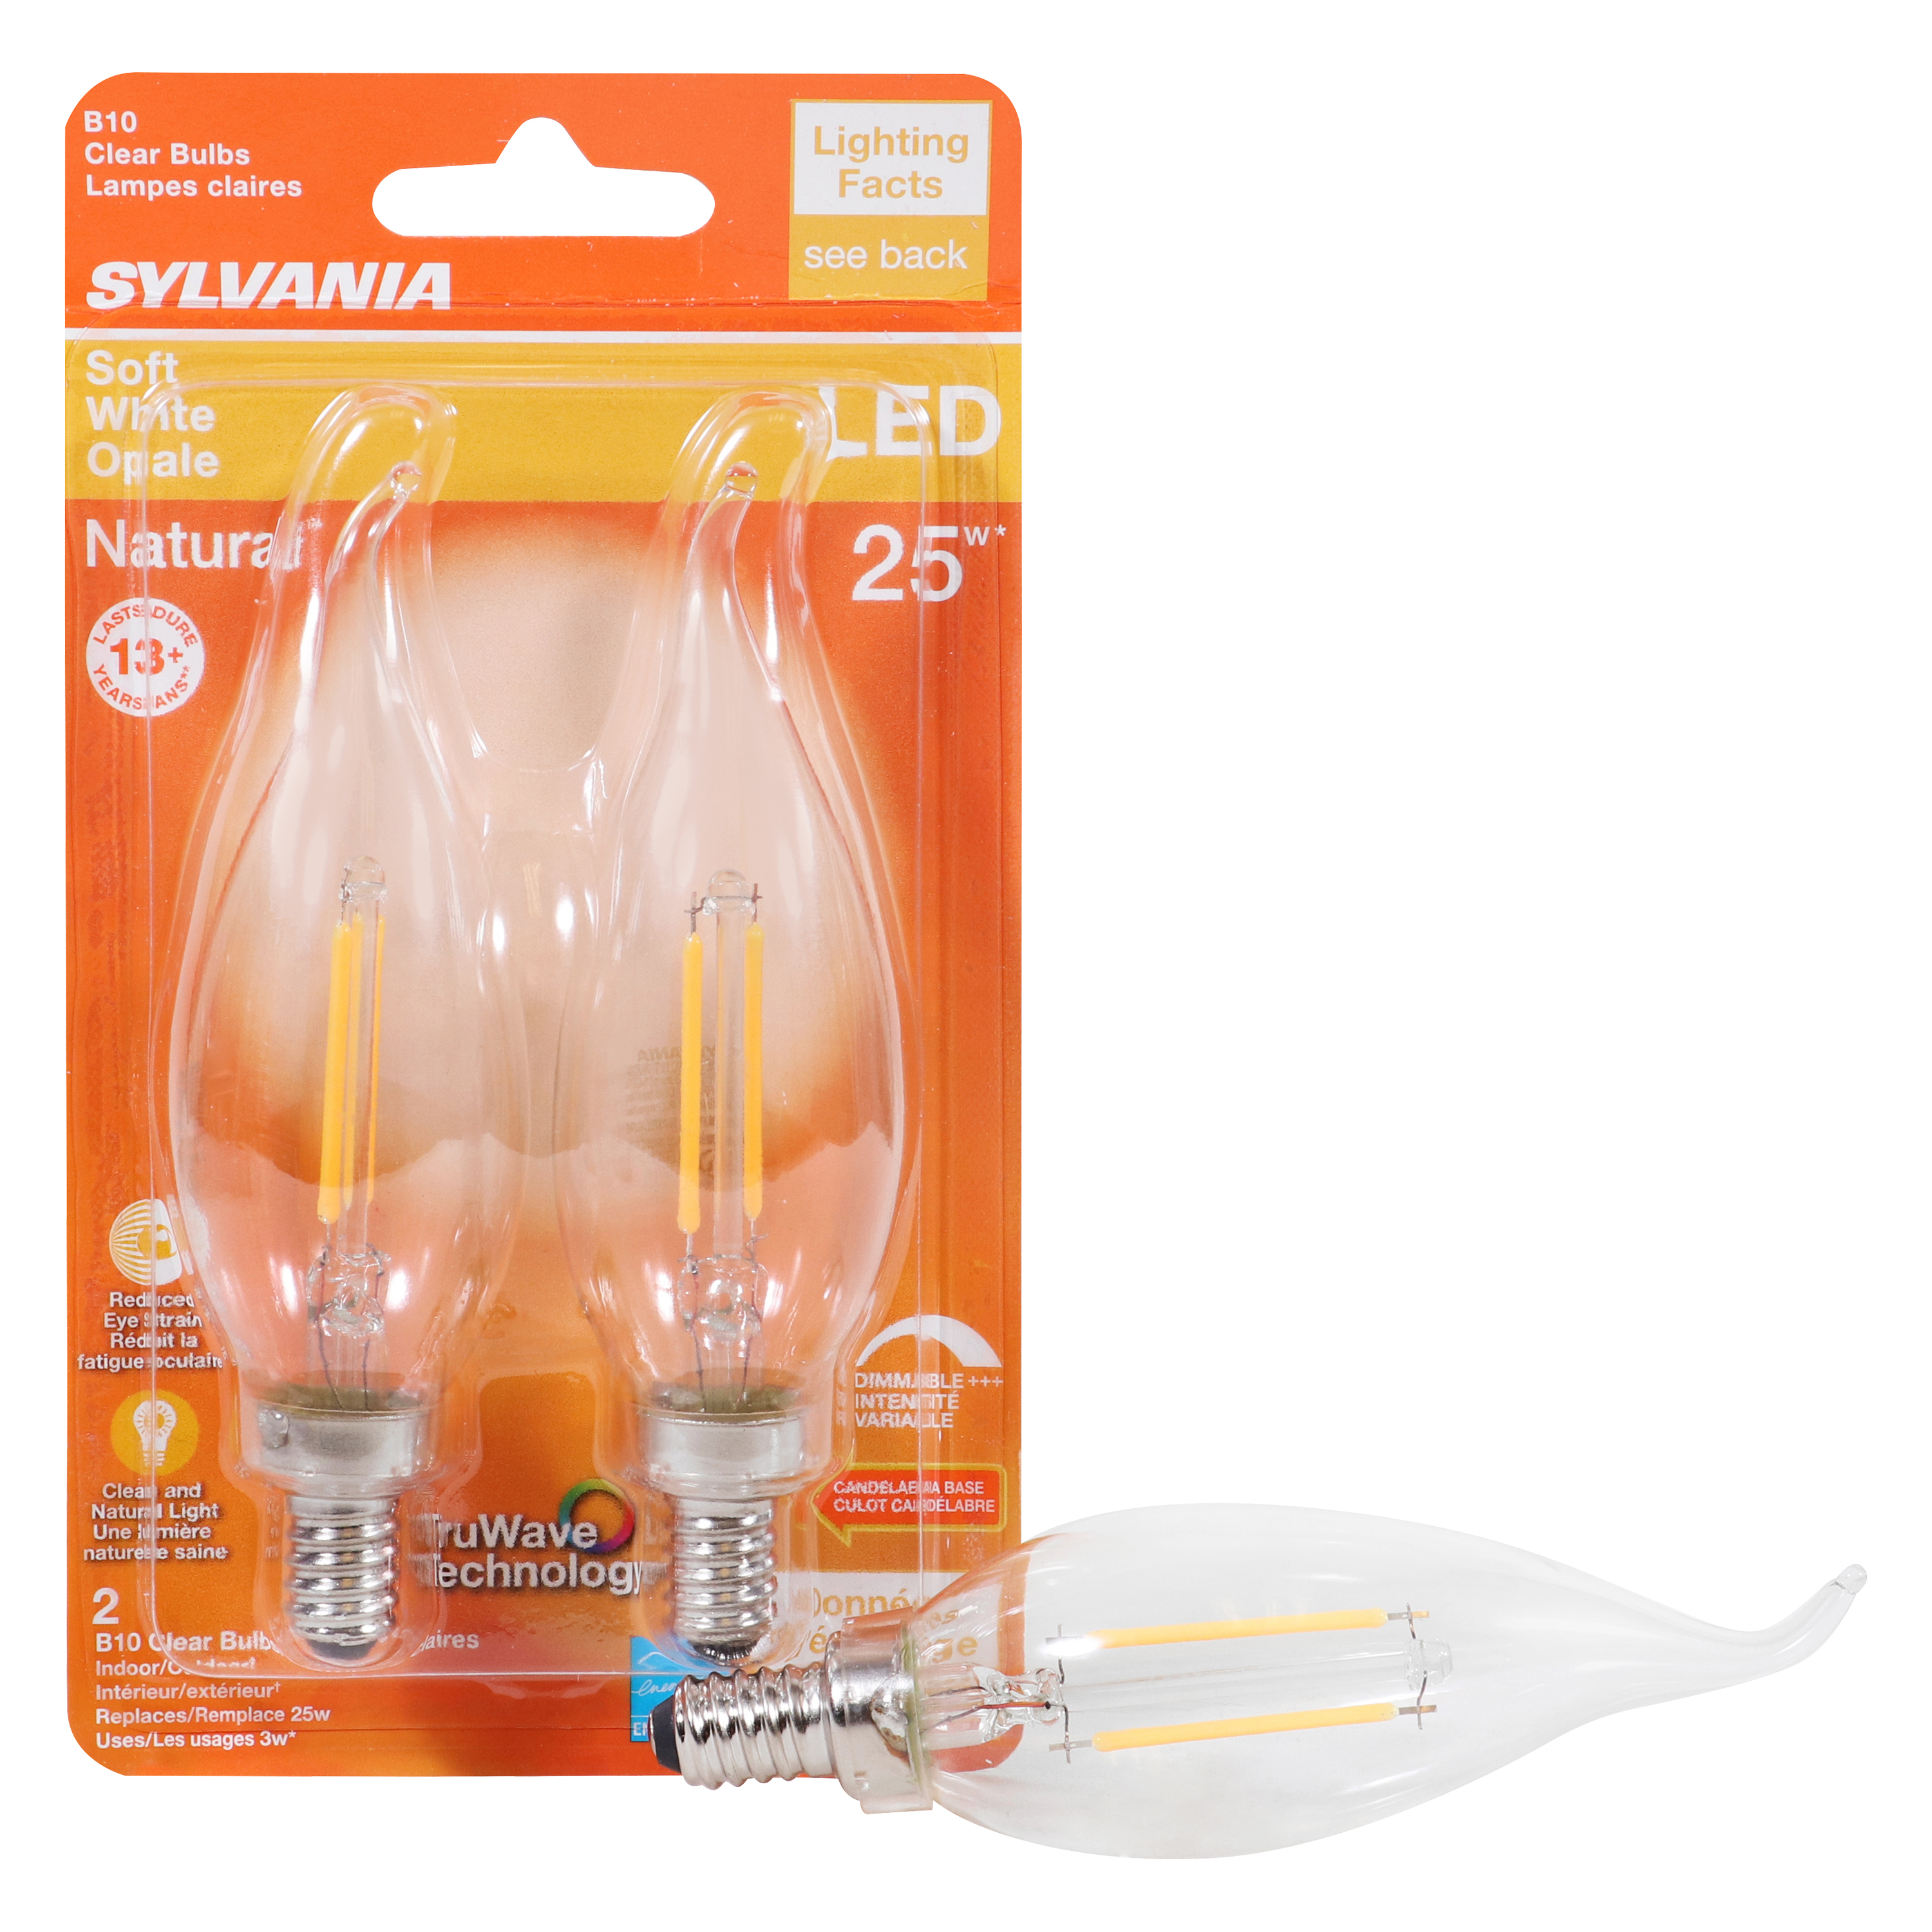 Sylvania 40854 Natural LED Bulb, Decorative, B10 Bent Tip Lamp, 25 W Equivalent, E12 Lamp Base, Dimmable, Clear